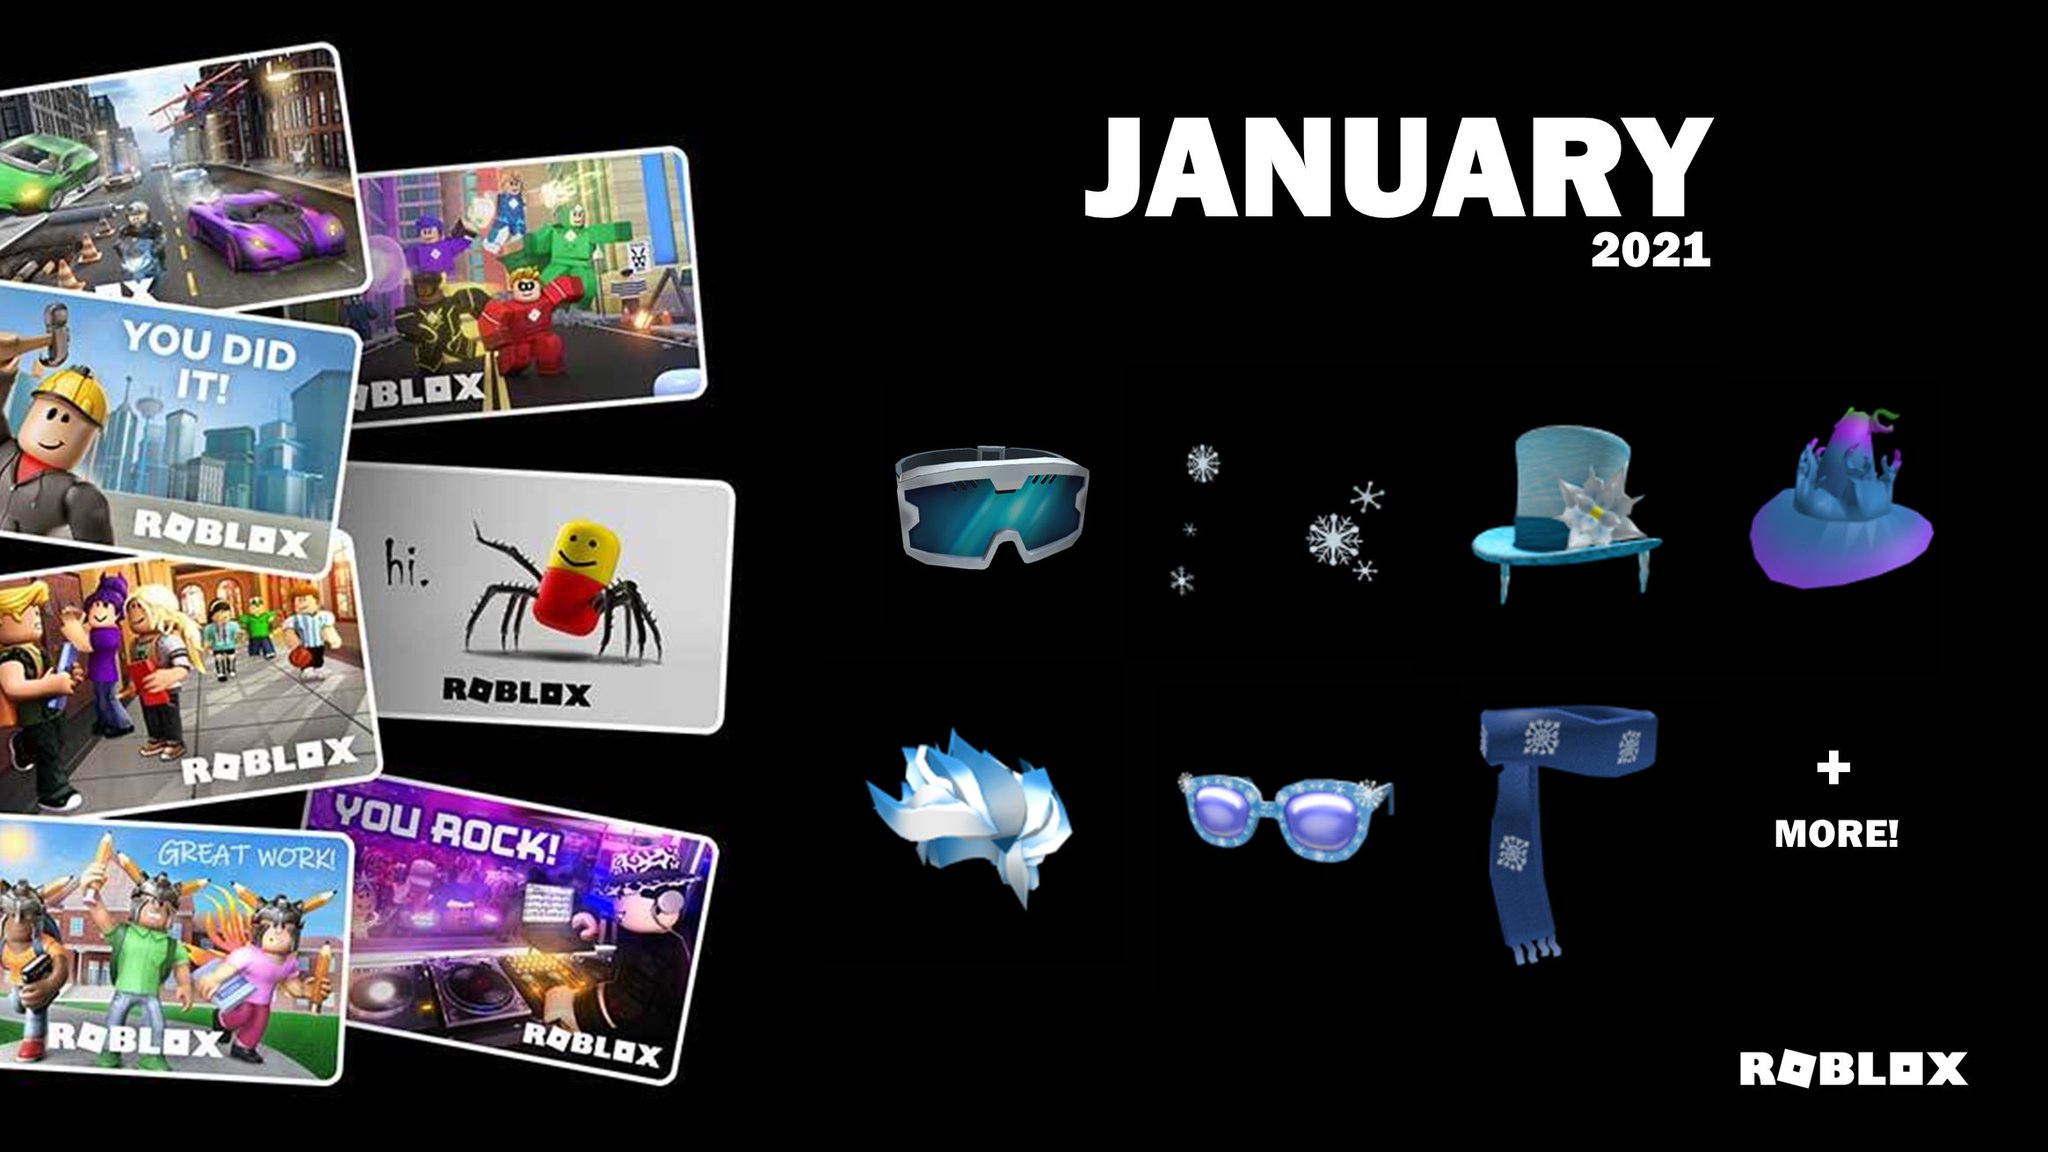 Bloxy News On Twitter The Roblox Gift Card Virtual Items And Their Corresponding Stores For January 2021 Are Now Available Check Them Out Here Https T Co Pujwqlz5yt Purchase A Gift Card - roblox cards special item